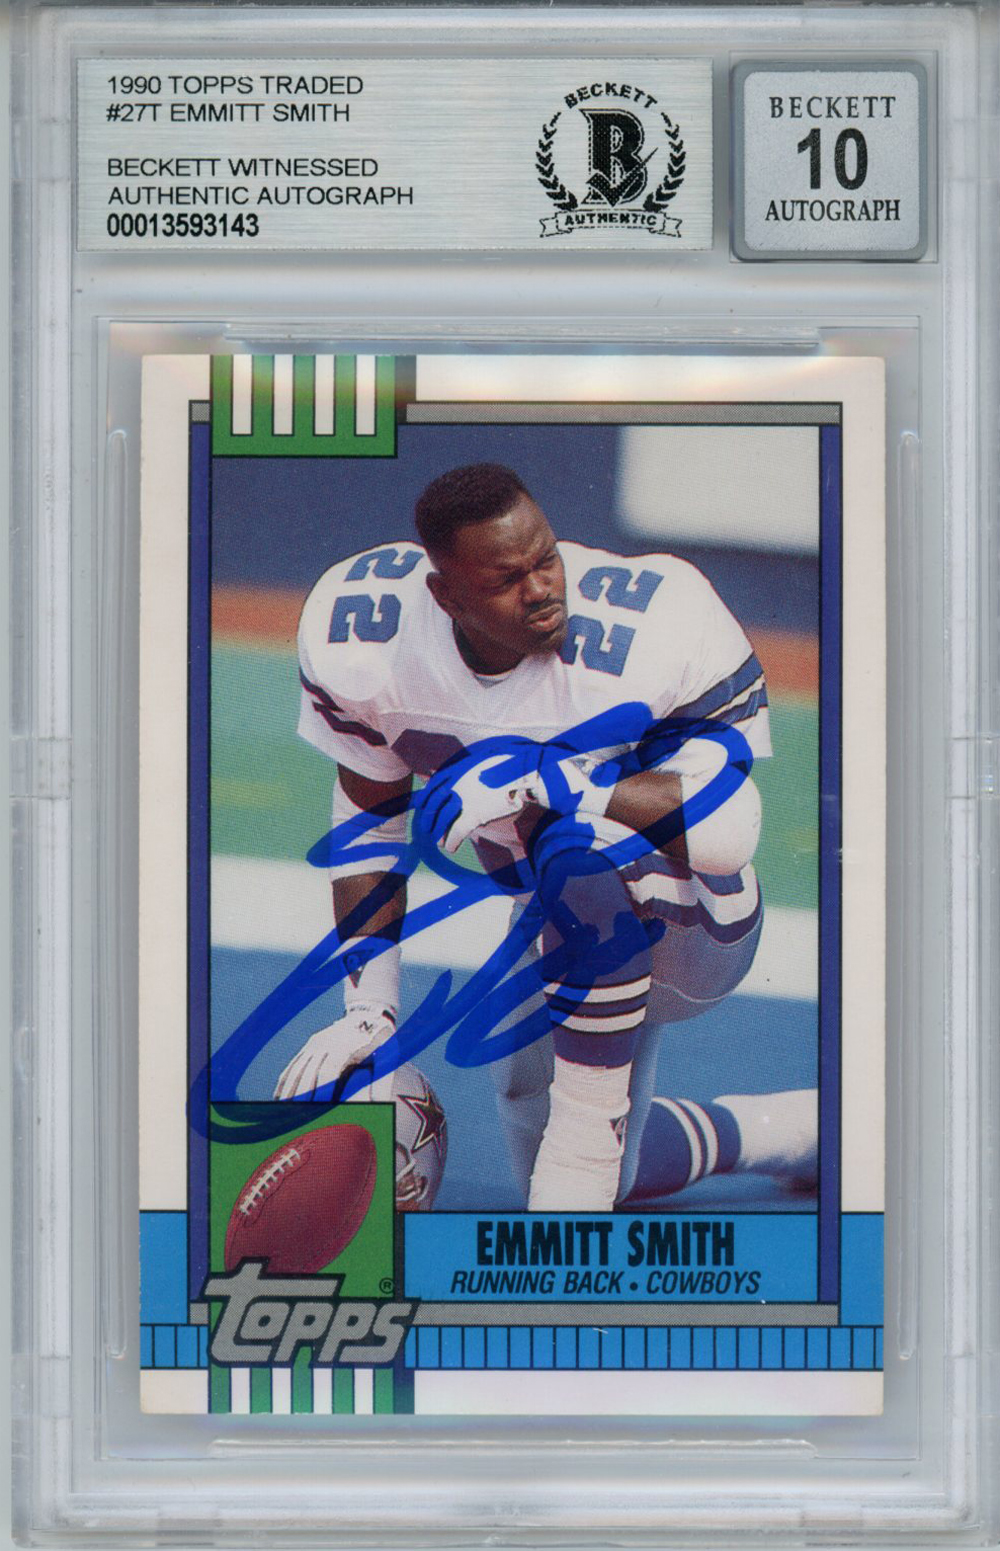 Emmitt Smith Signed 1990 Topps Traded #27T Rookie Card Beckett 10 Slab